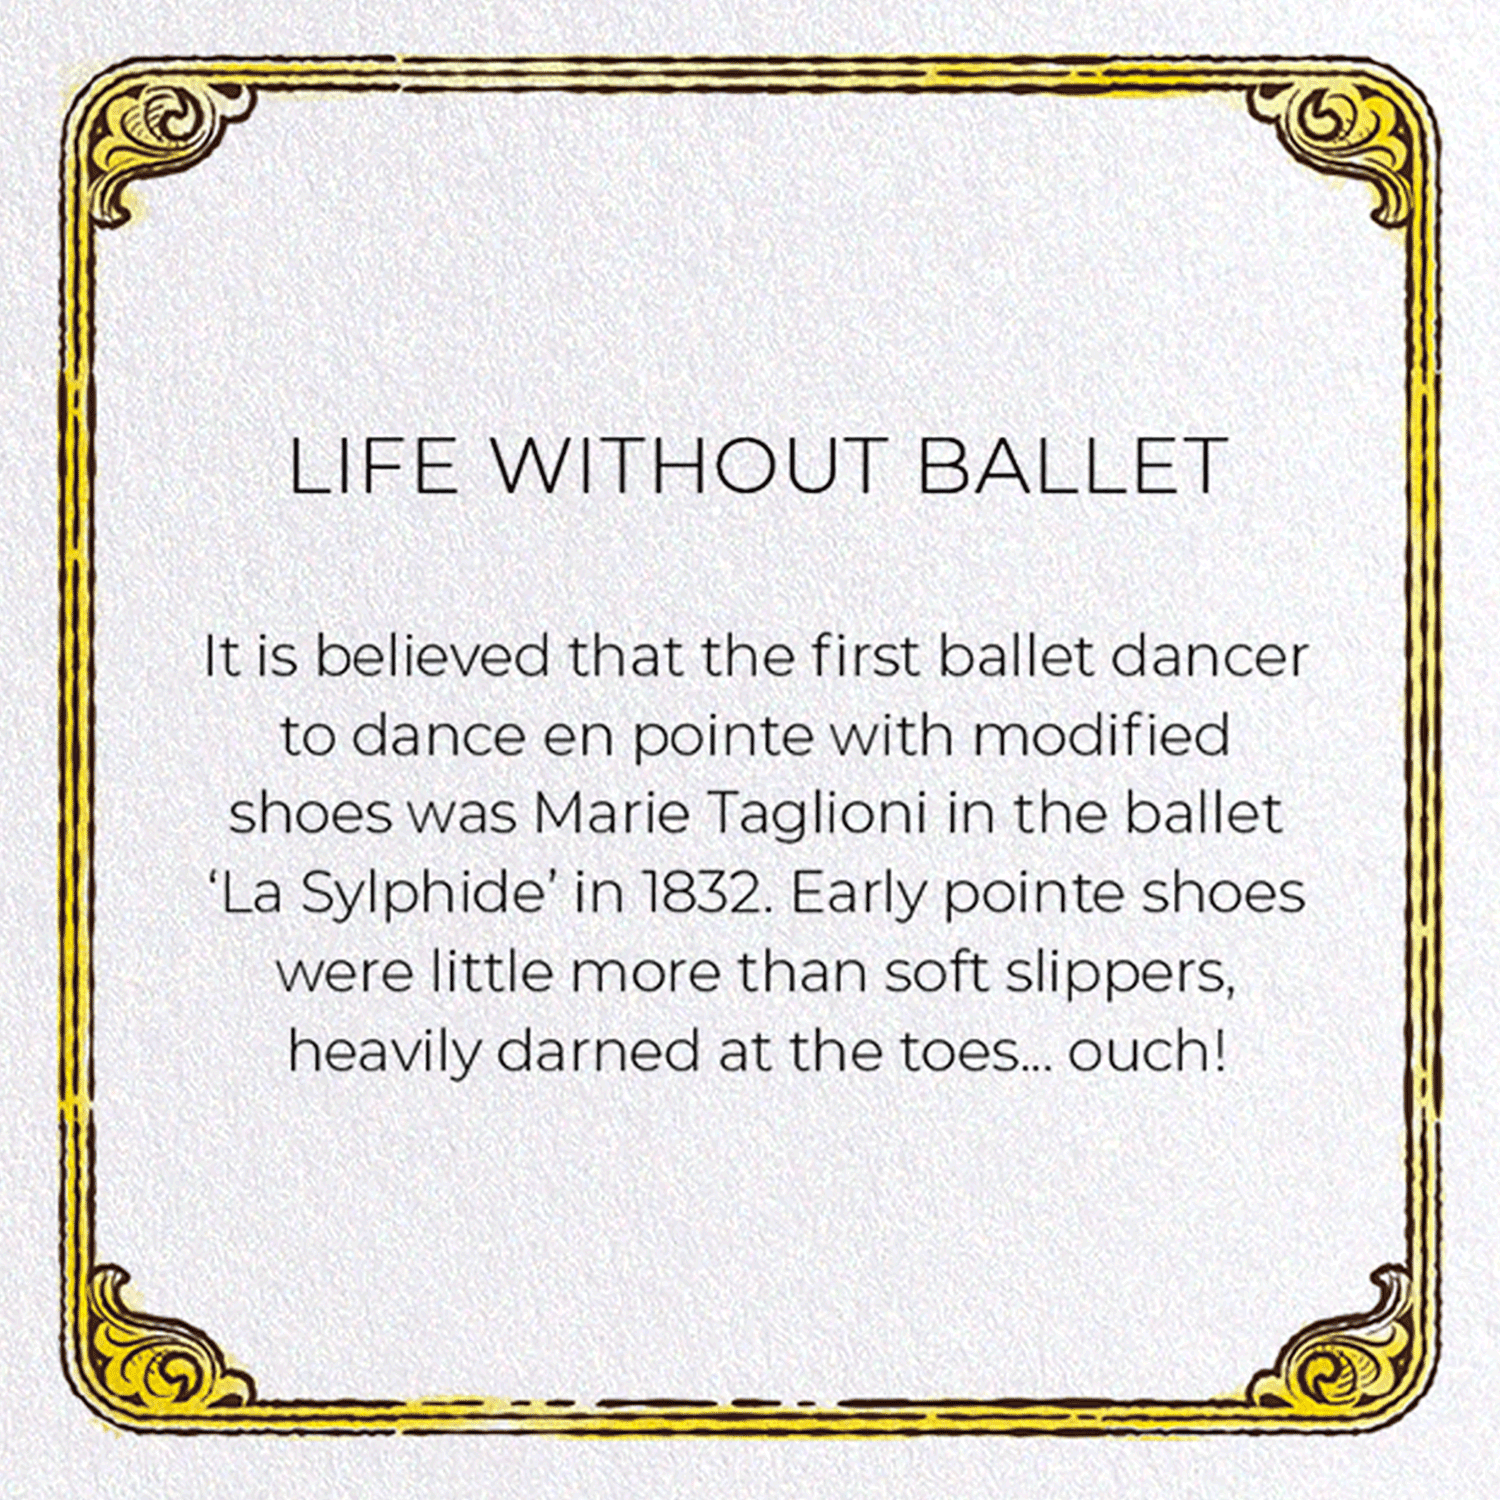 LIFE WITHOUT BALLET: Victorian Greeting Card